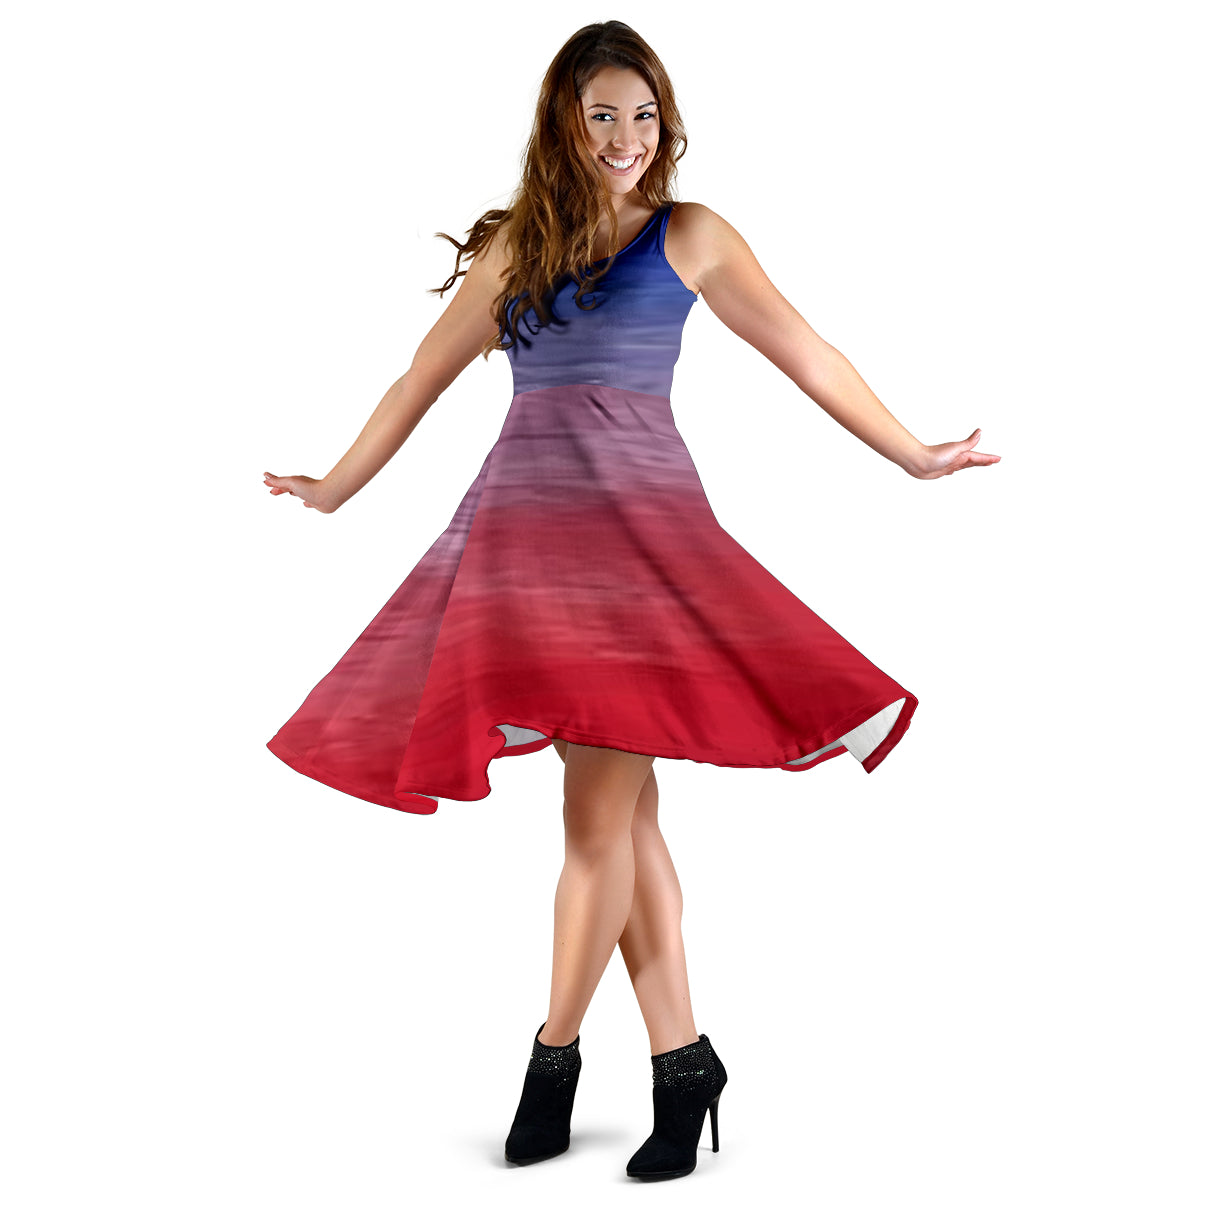 Women's dress with design entitled red mist